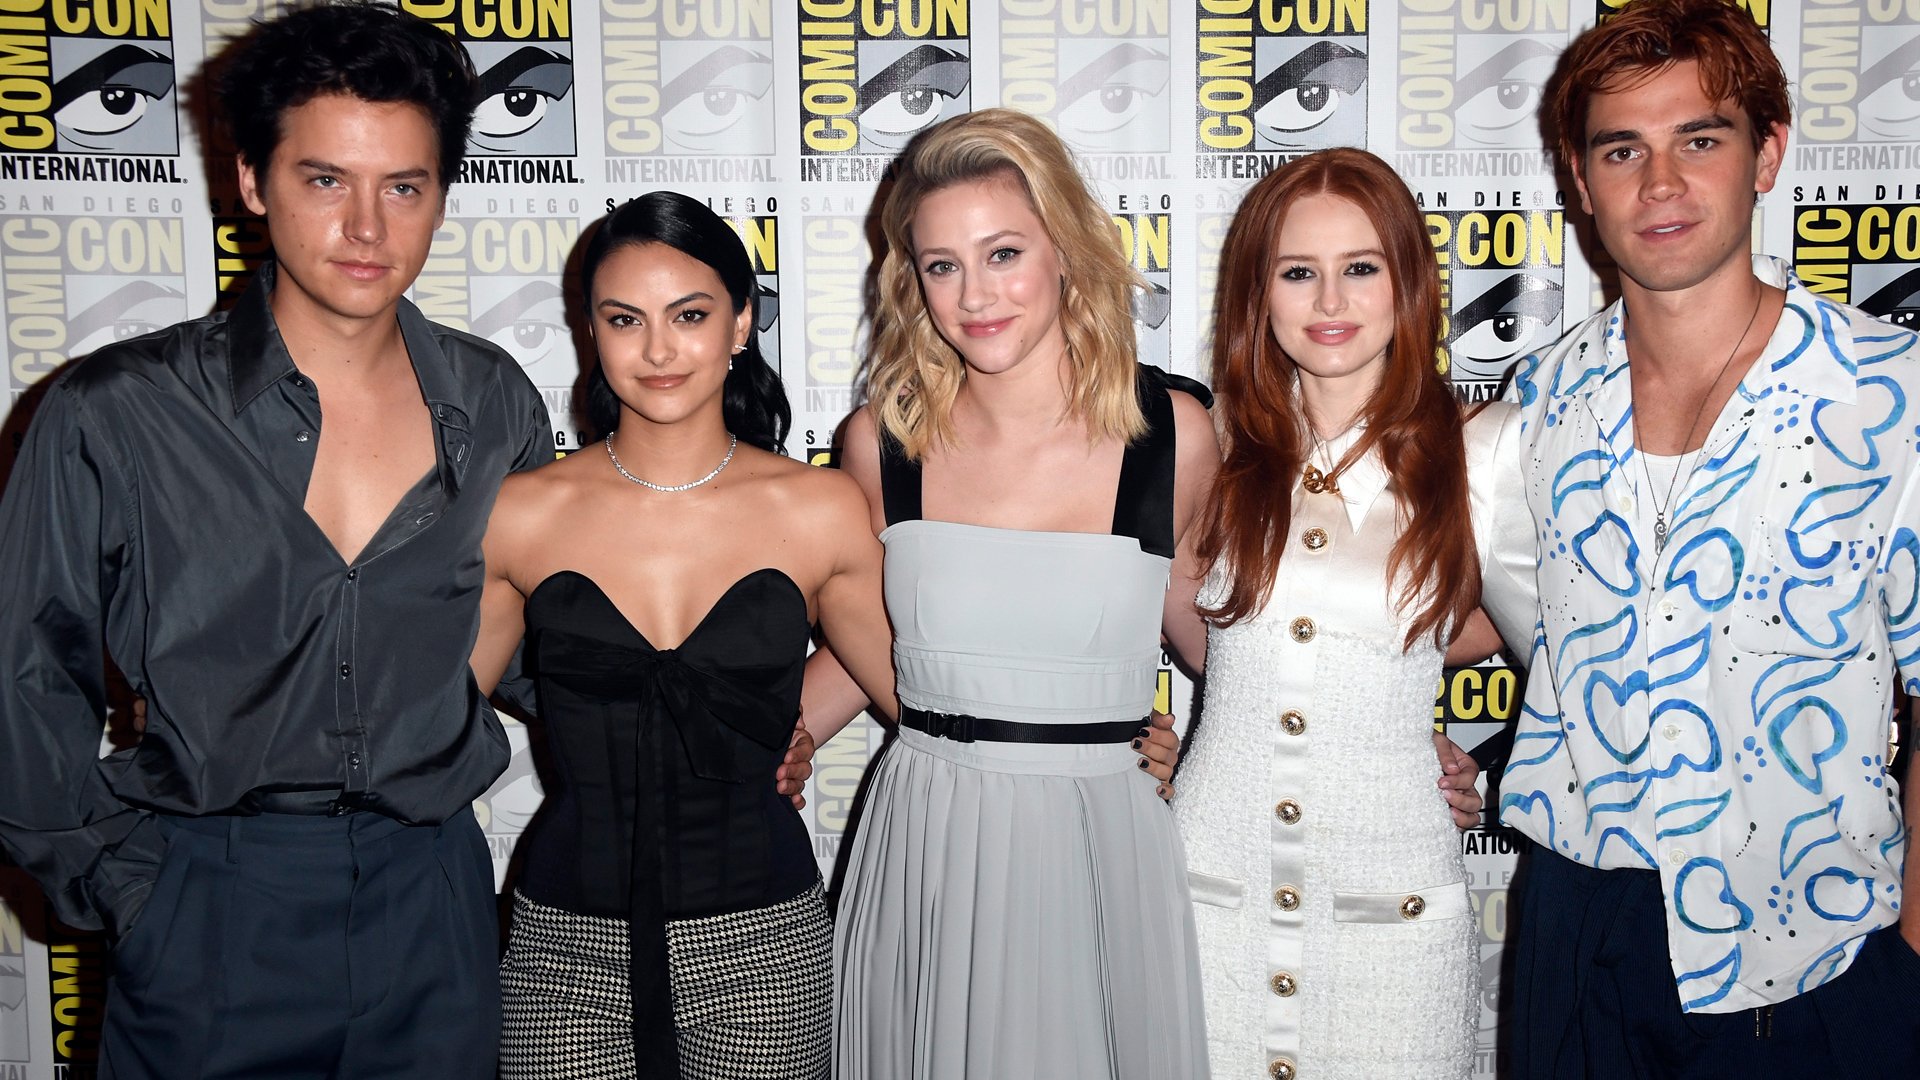 Cole Sprouse, Camila Mendes, Madelaine Petsch, Lili Reinhart, and KJ Apa from 'Riverdale' at 2019 Comic-Con in San Diego, CA